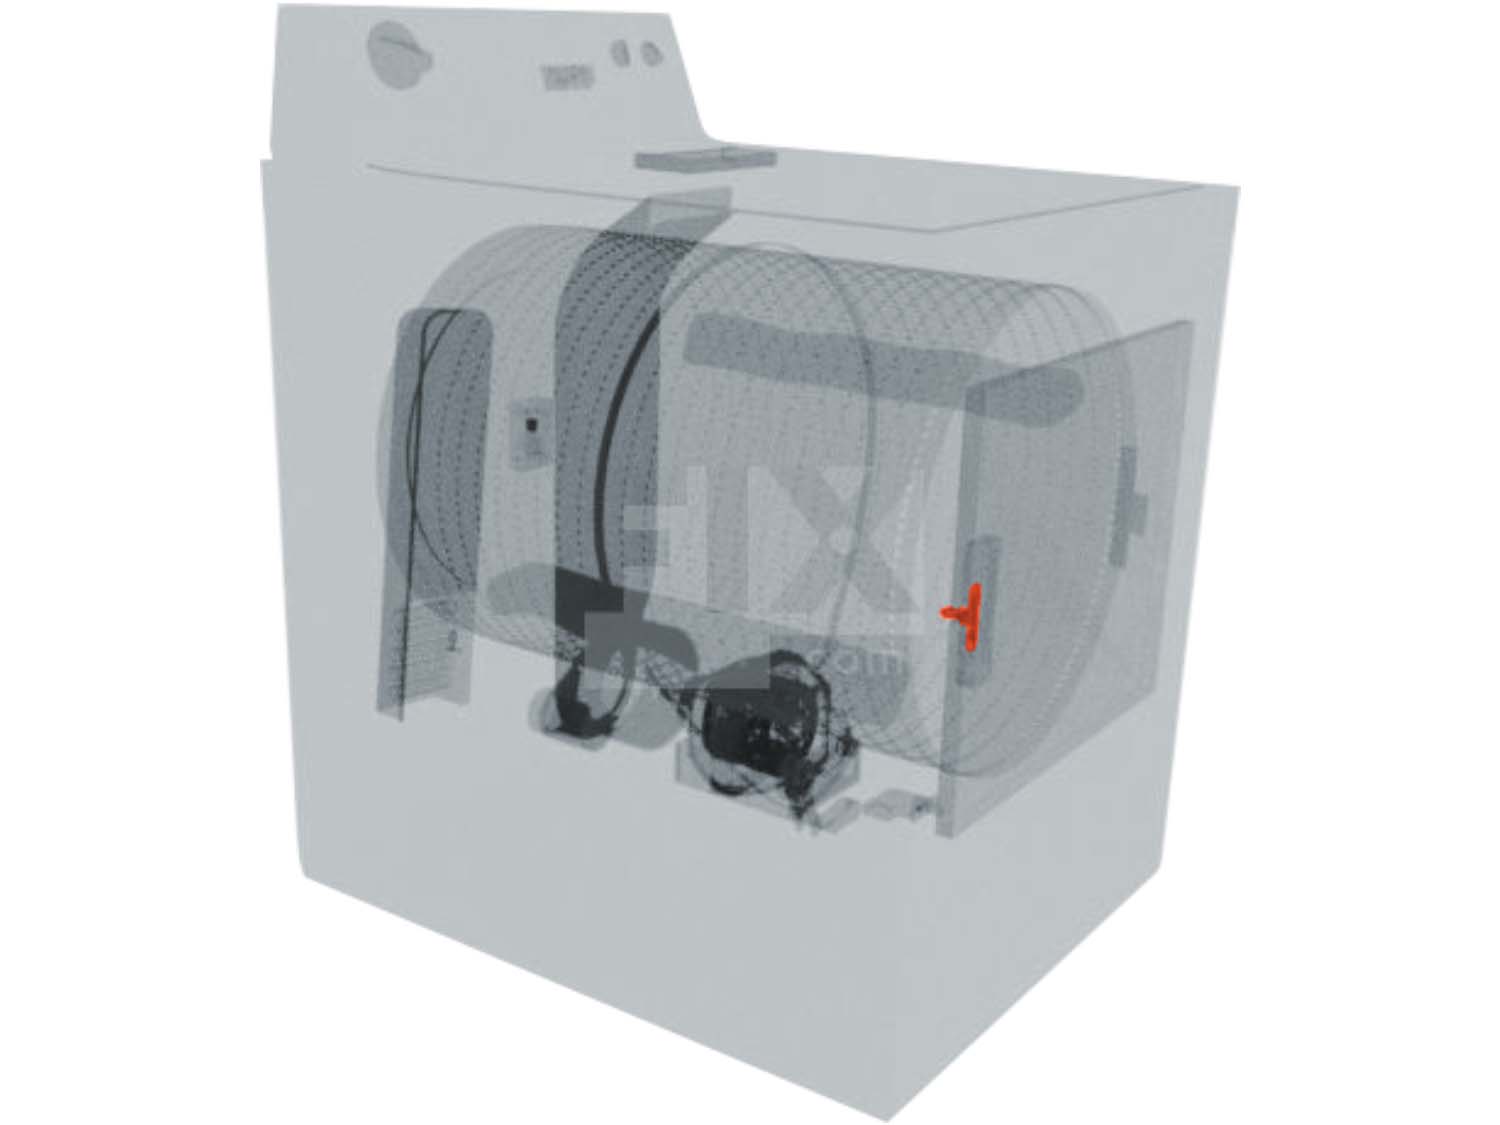 A 3D diagram showing the components of a dryer and specifying the location of the door strike